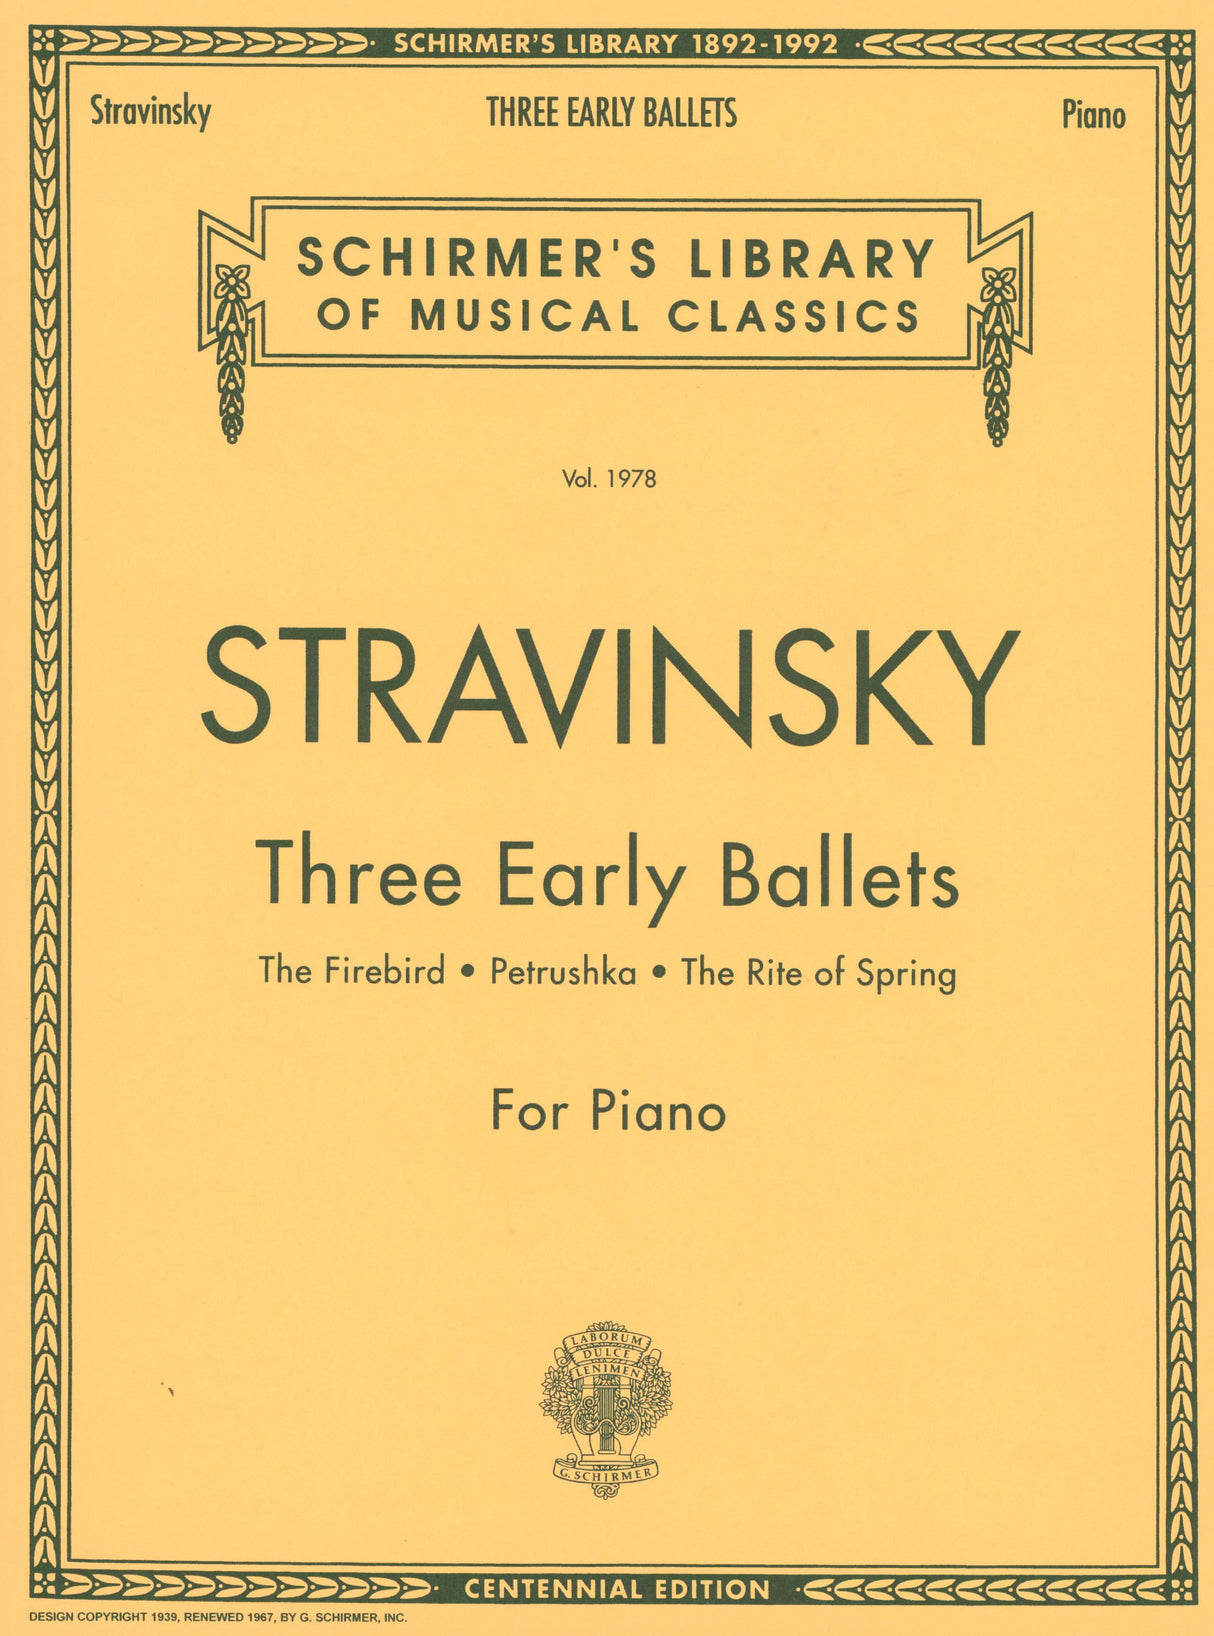 Stravinsky: 3 Early Ballets - The Firebird, Petrushka, The Rite of Spring (arr. for piano)